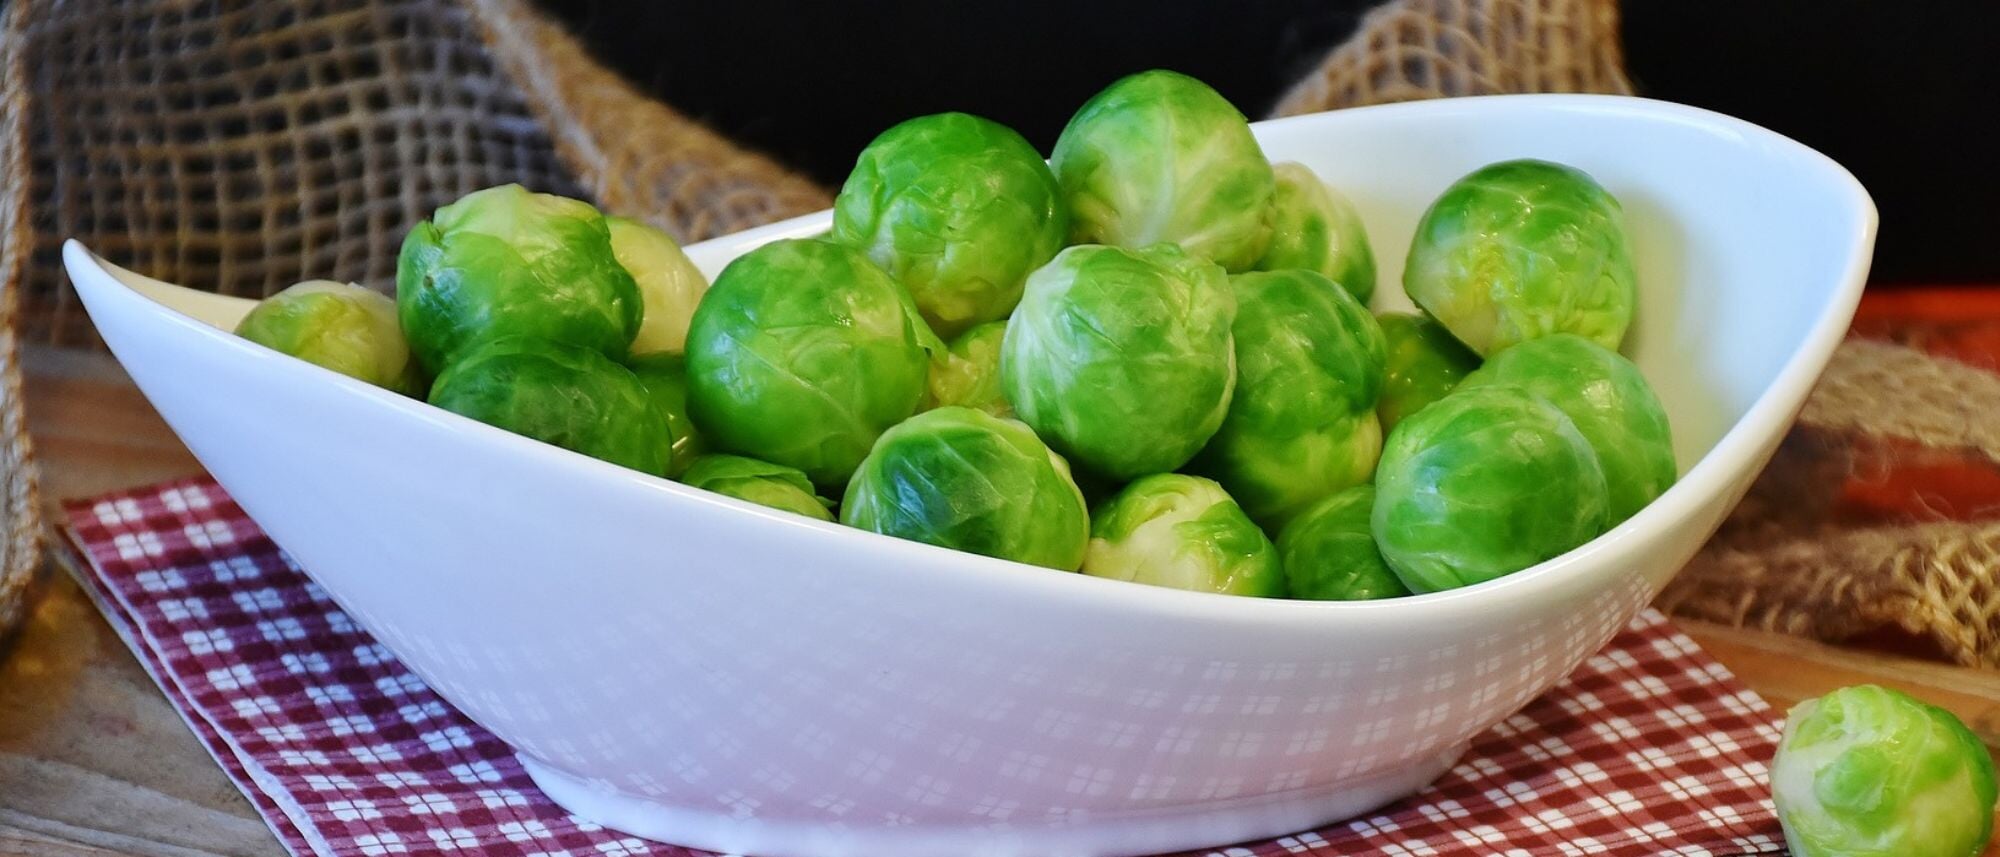 Grow nutritious brussels sprouts in your home vegetable garden